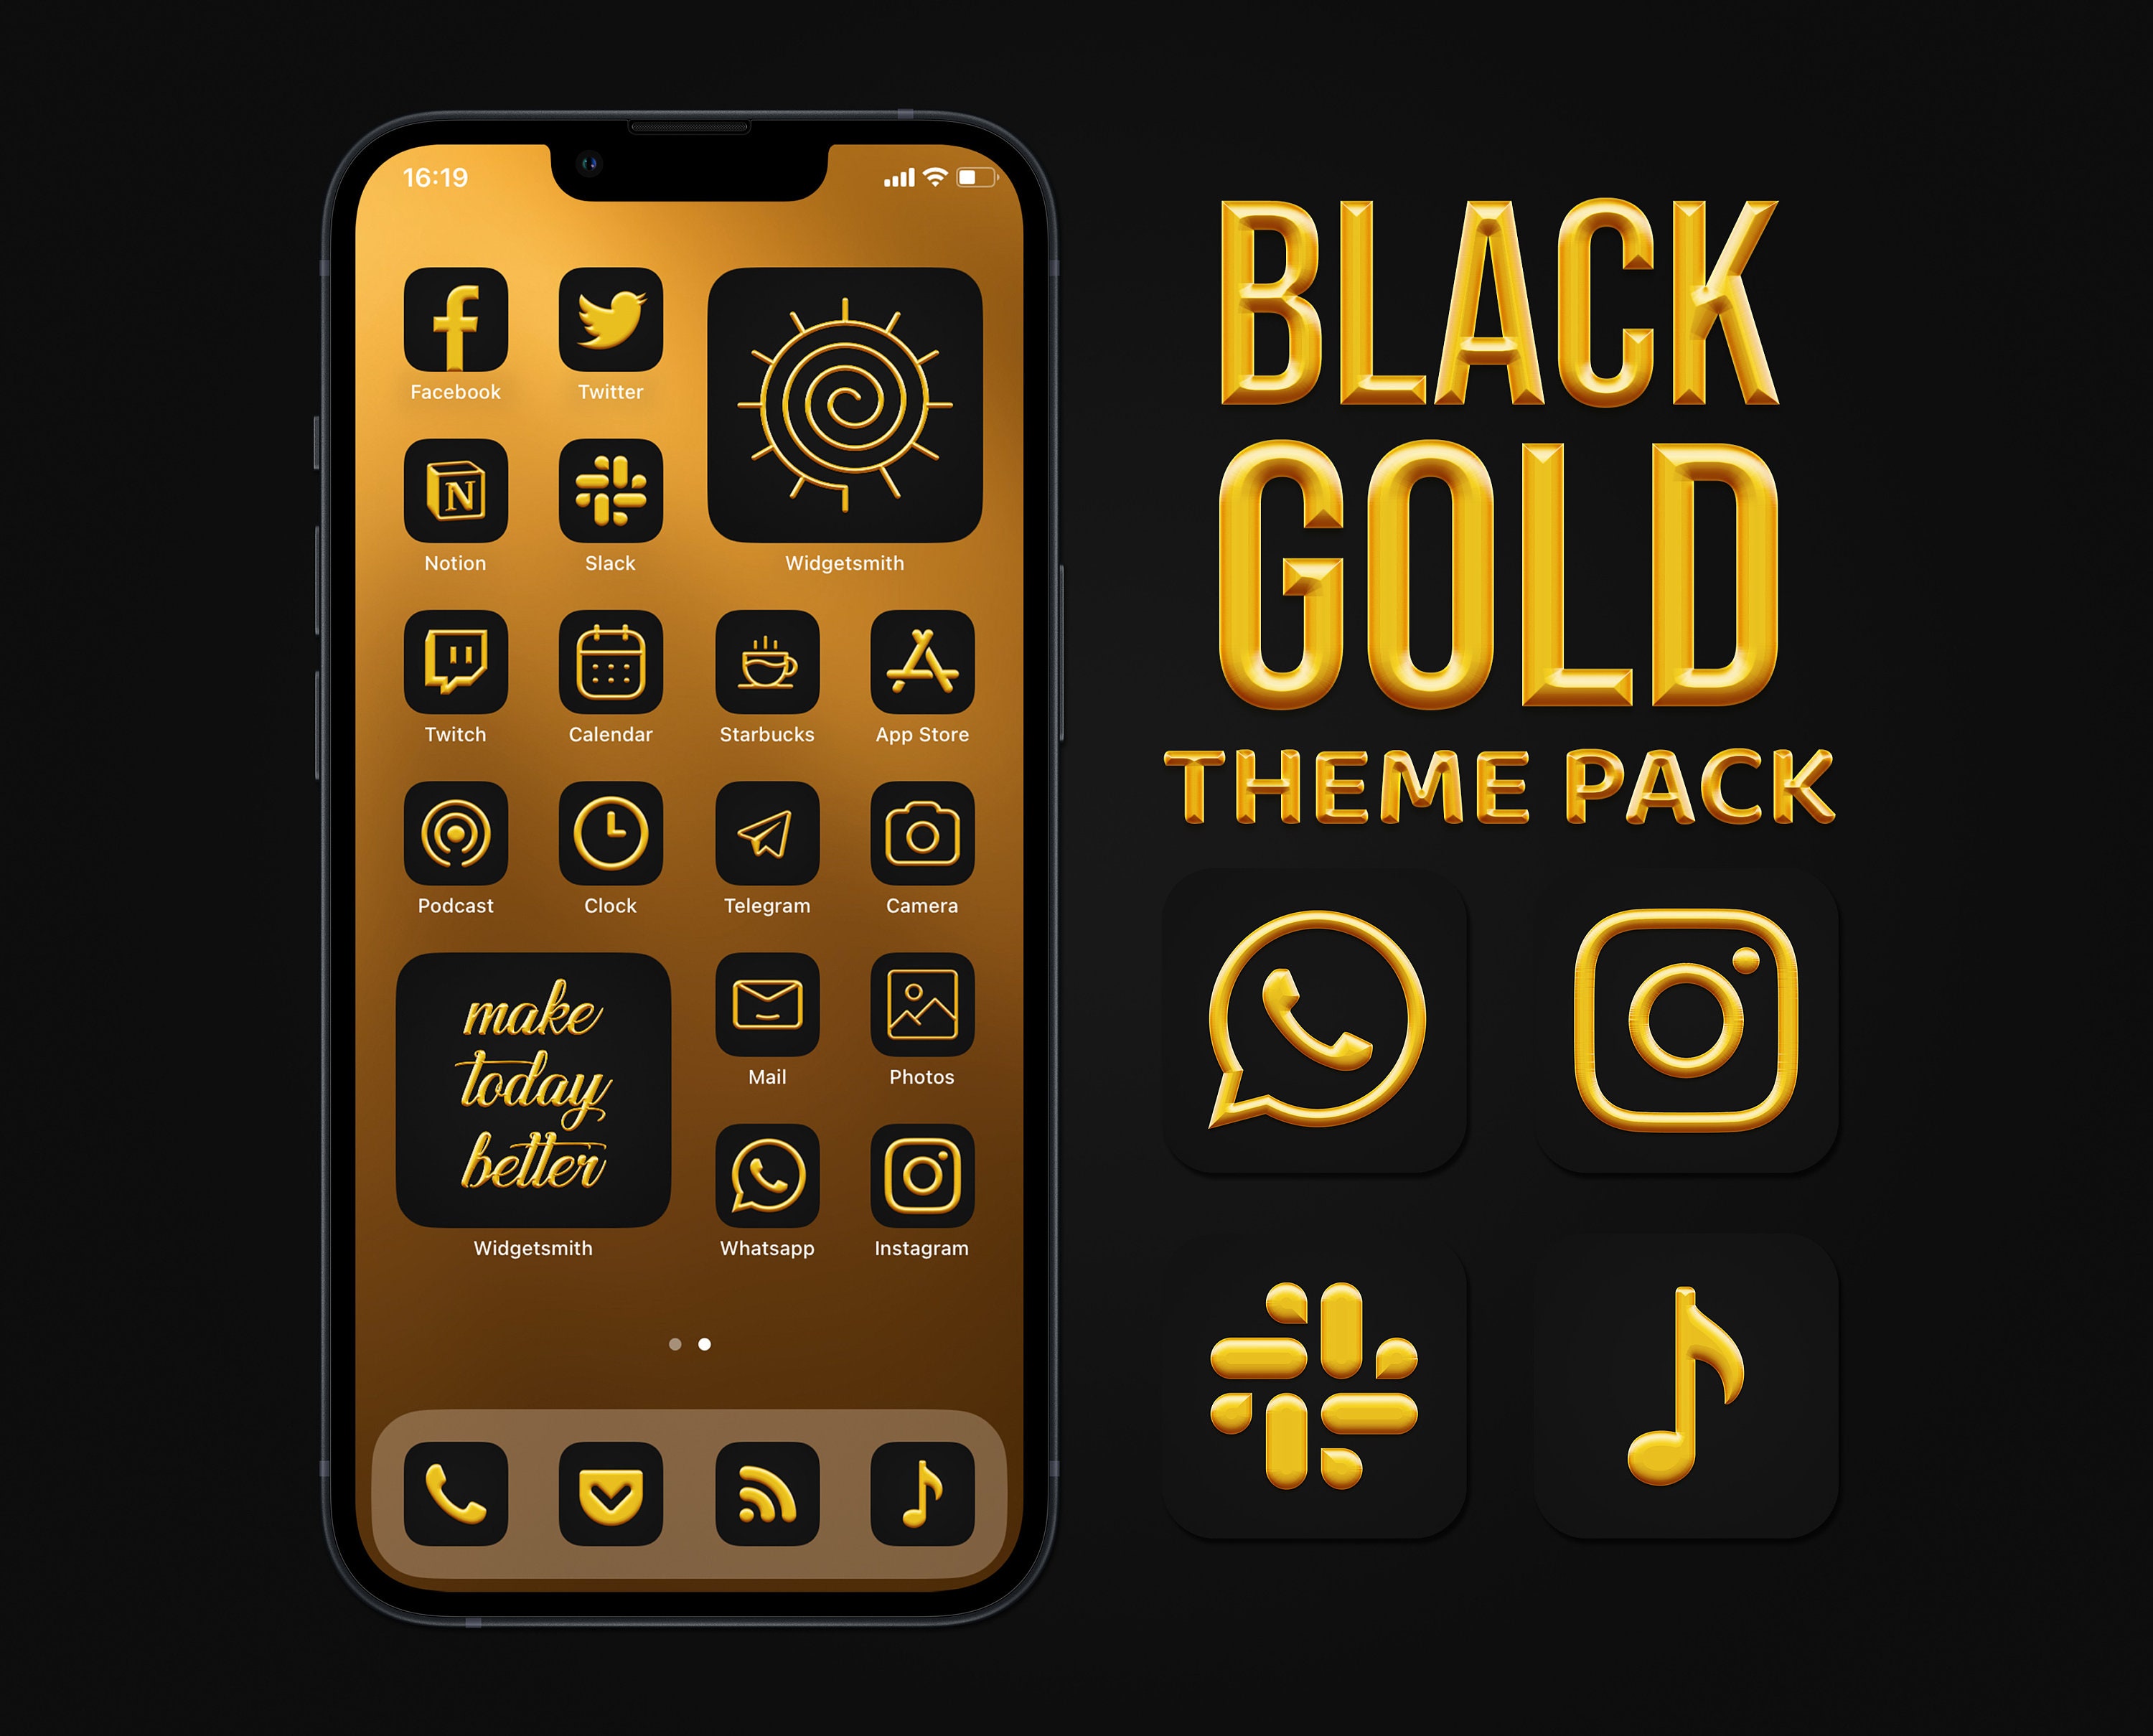 Louis Vuitton (Light) - Luxury iOS 14 Icons - 250+ Included